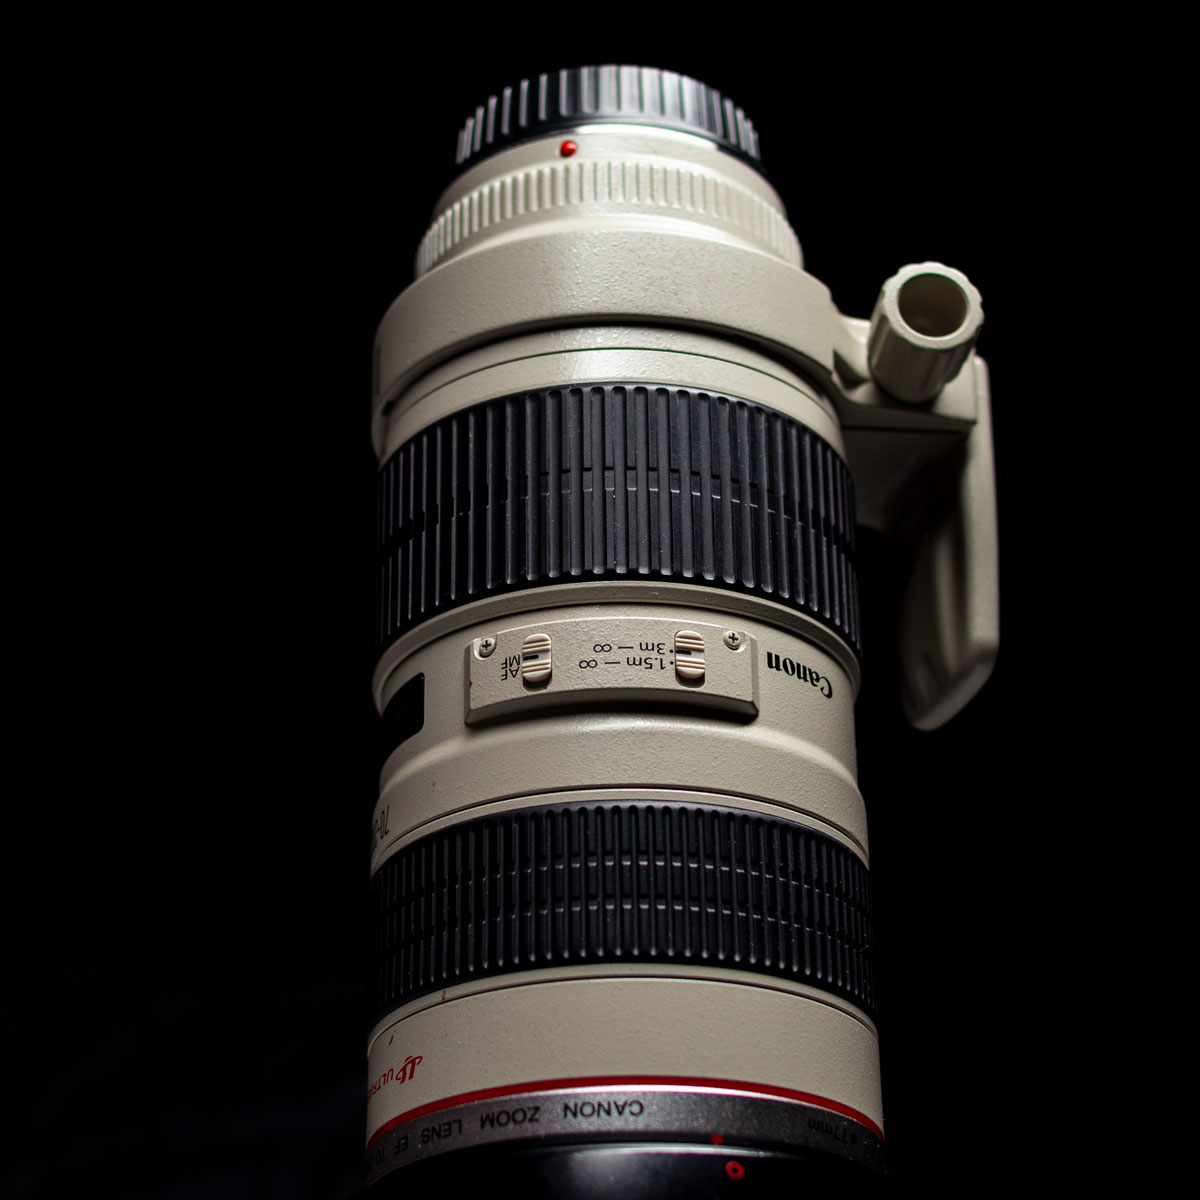 Photographed from below the Canon 70-200mm lens carries much more power and mass than the previous photo.